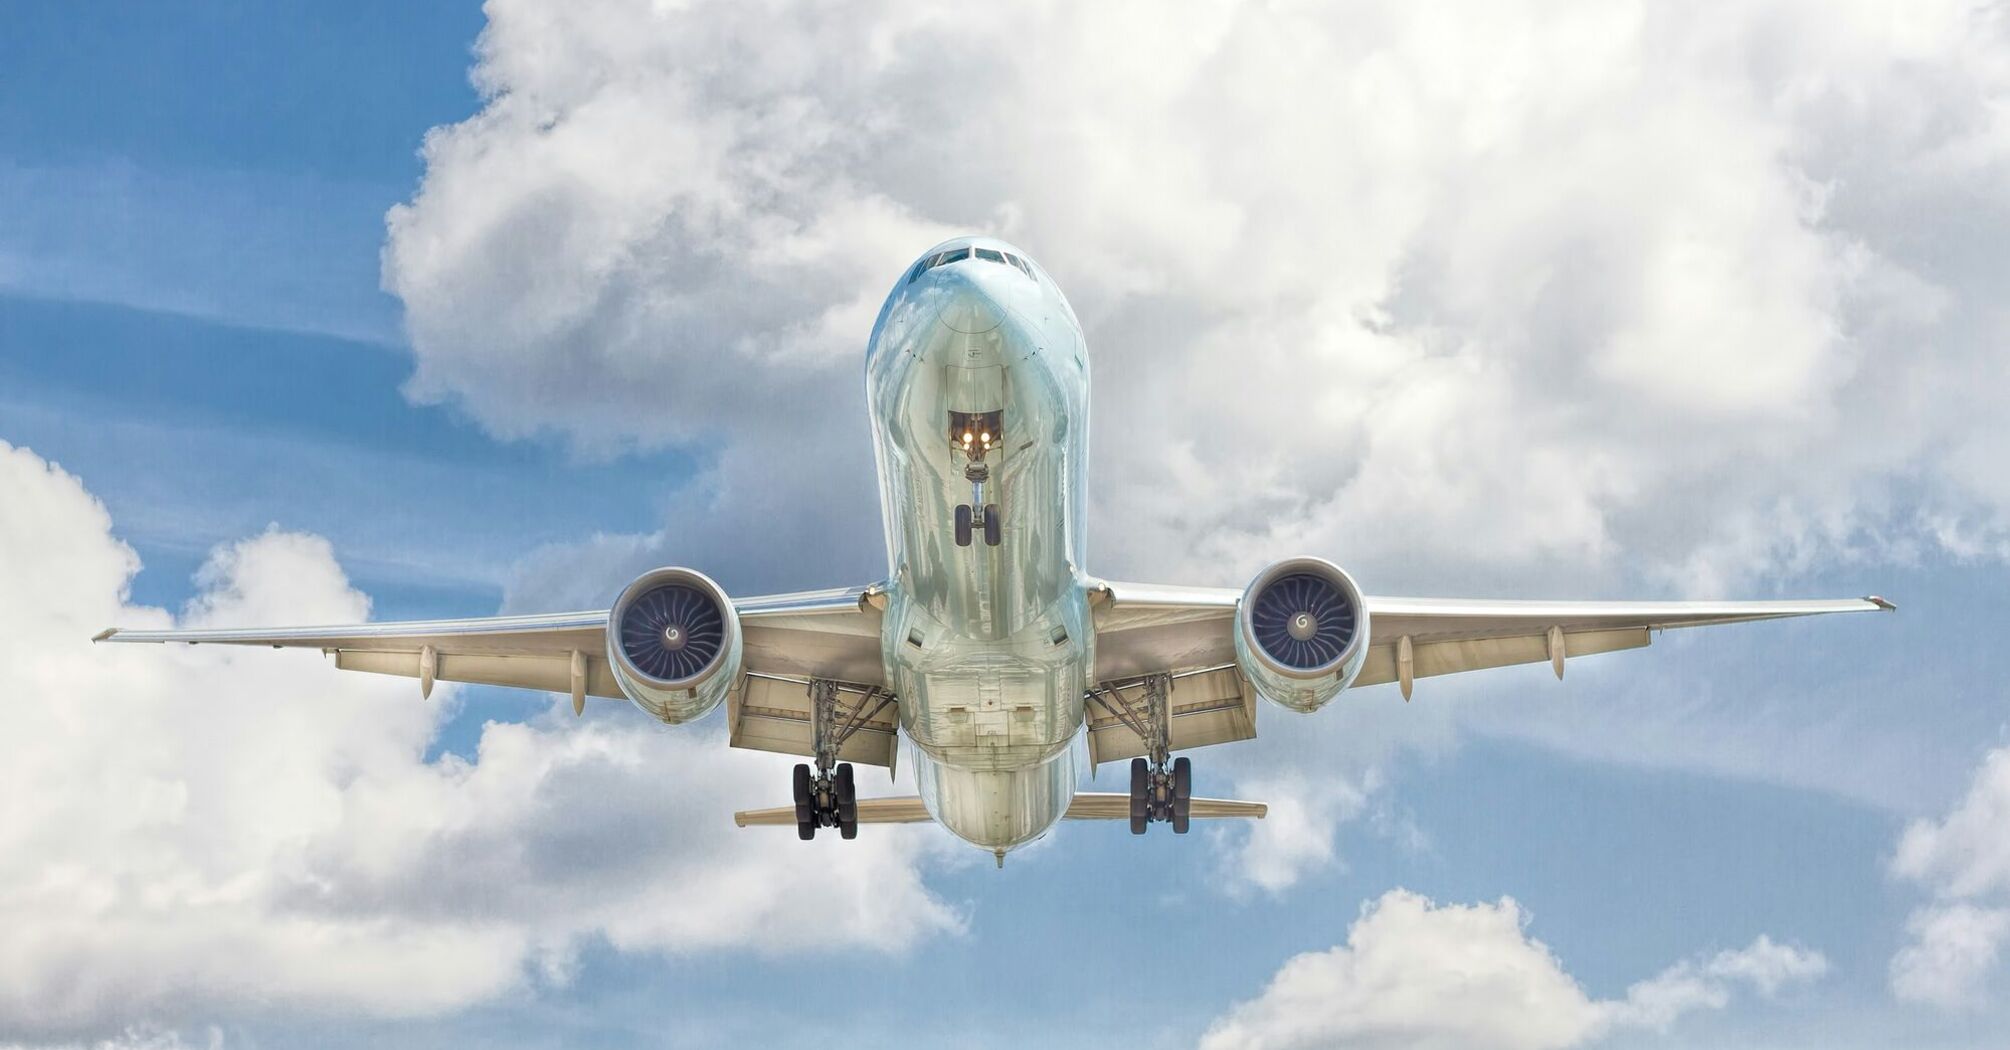 Commercial airplane in flight viewed from the front, with landing gear down against a backdrop of cloudy blue sky